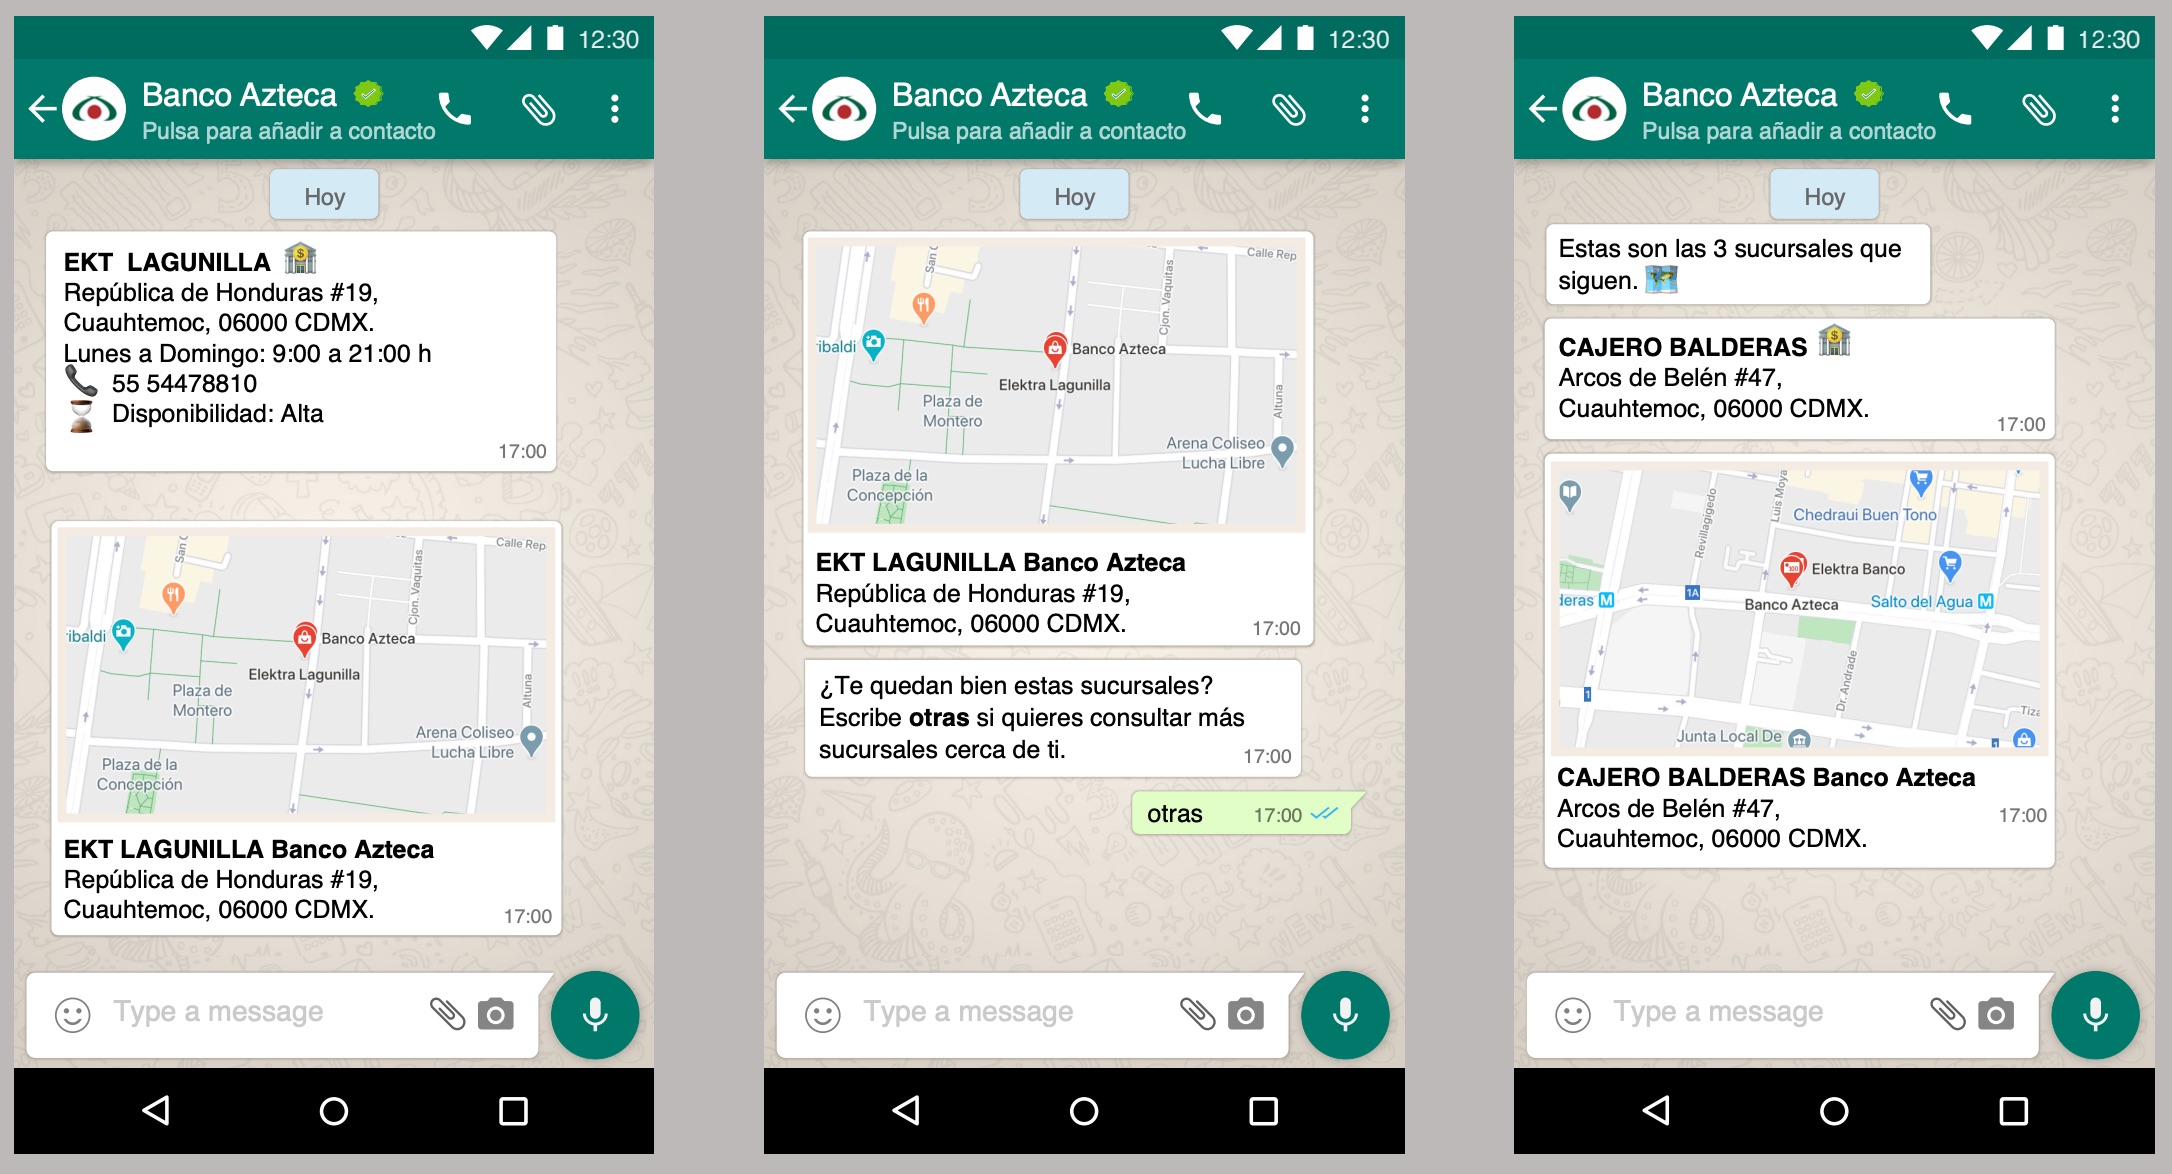 Store Locator WhatsApp flow
click to enlarge